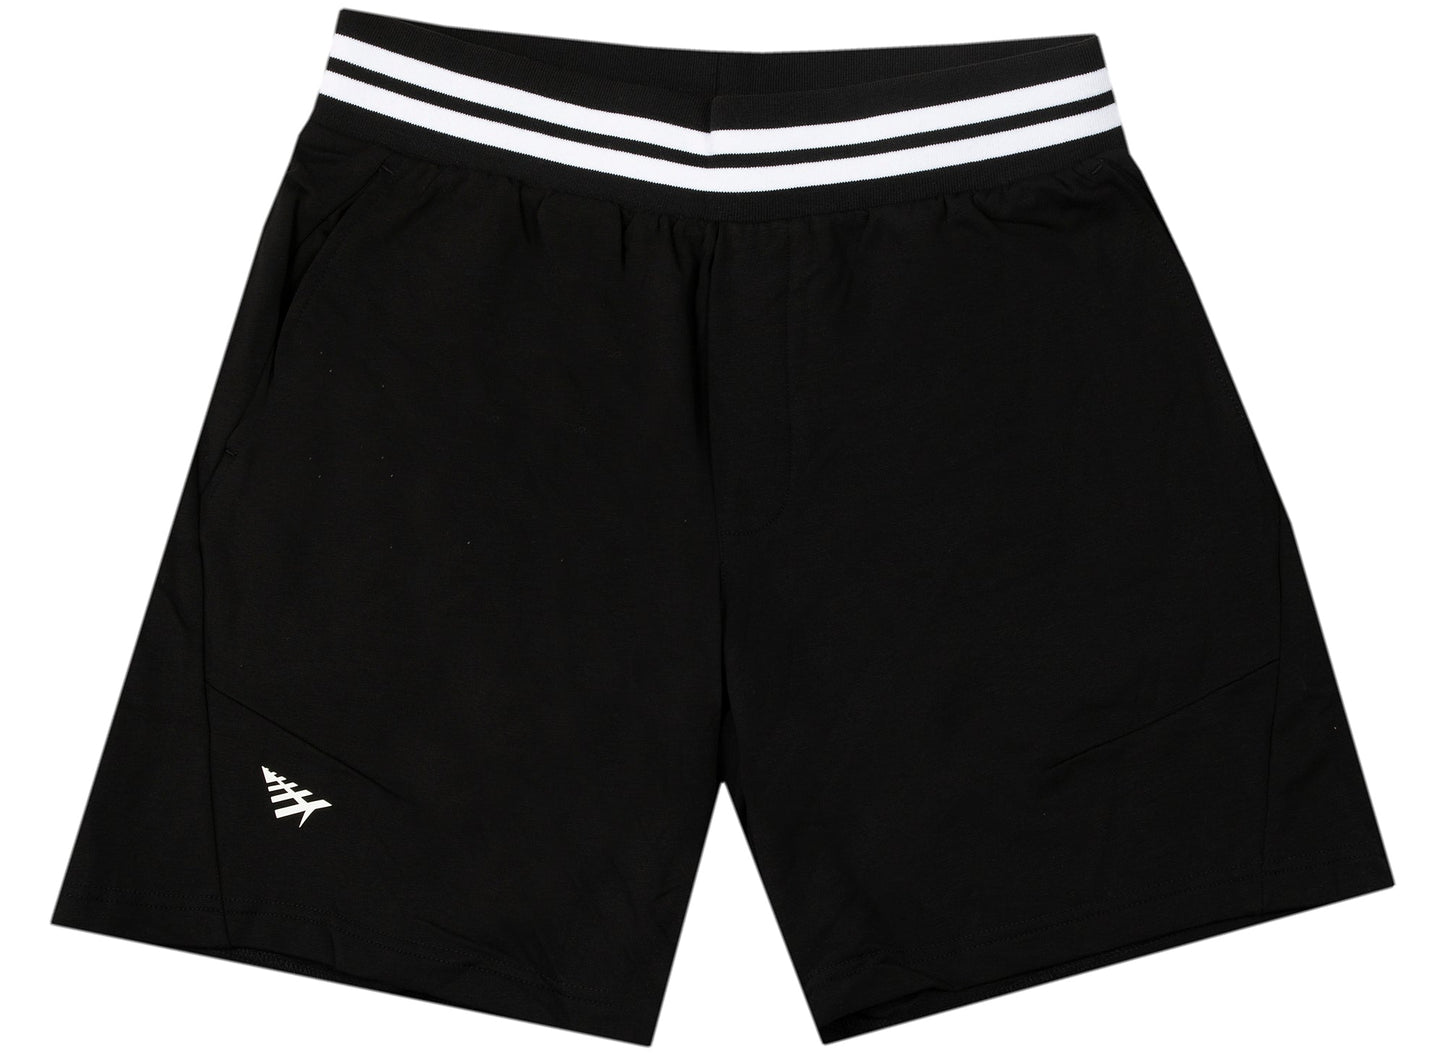 Paper Planes Altitude Shorts in Black